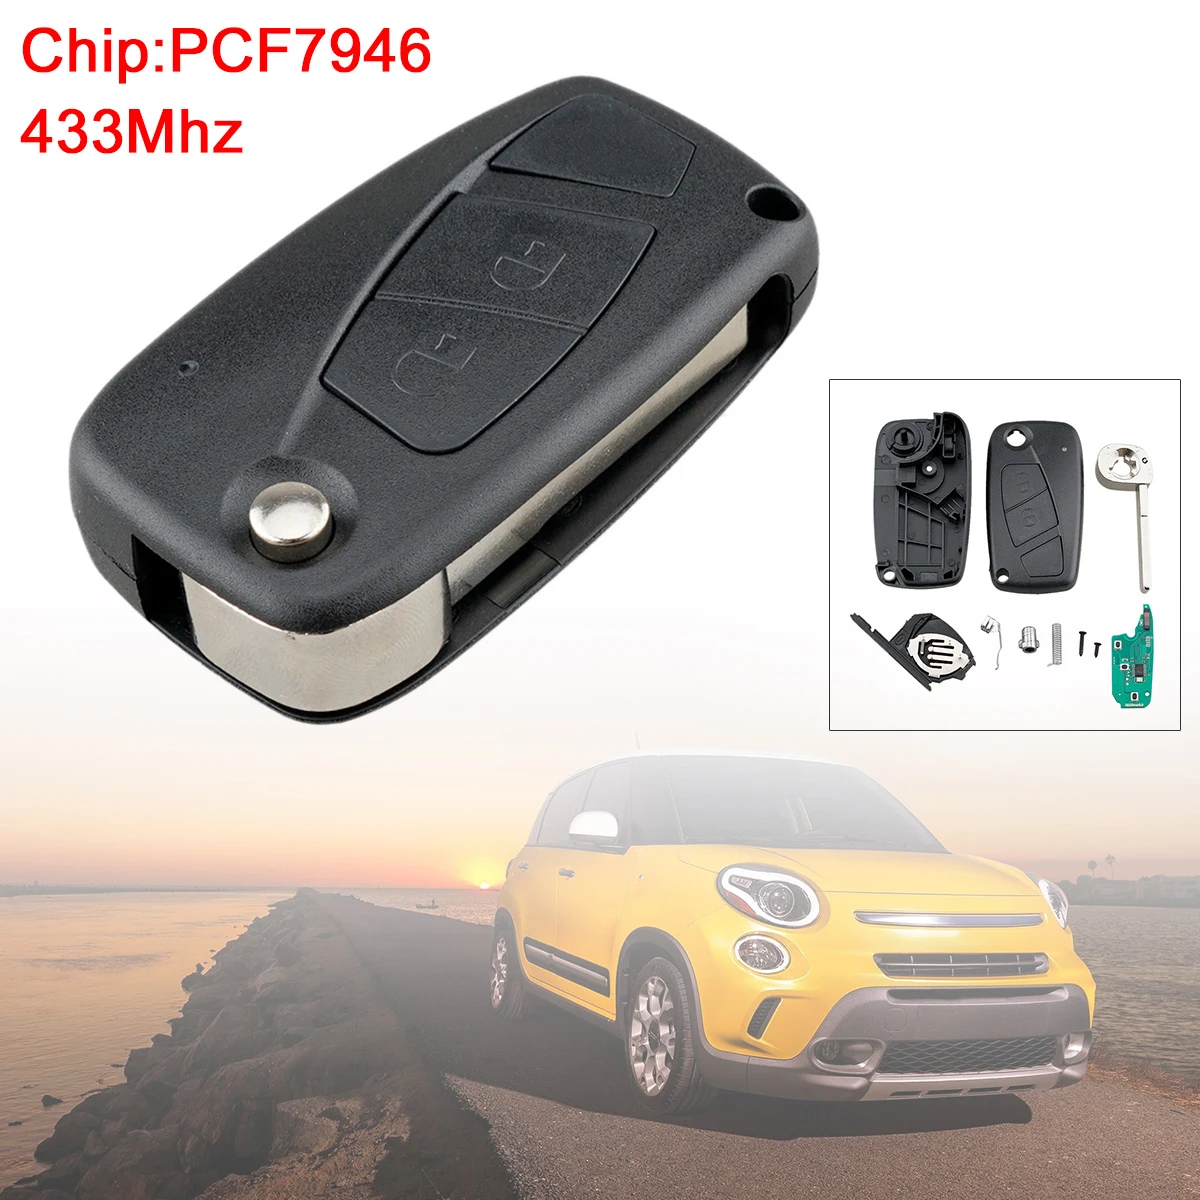 433Mhz 2 Buttons Flip Remote Car Key Fob with PCF7946 Chip Black Keyless Entry Transmitter for Fiat 500 Panda Bravo Punto Ducato